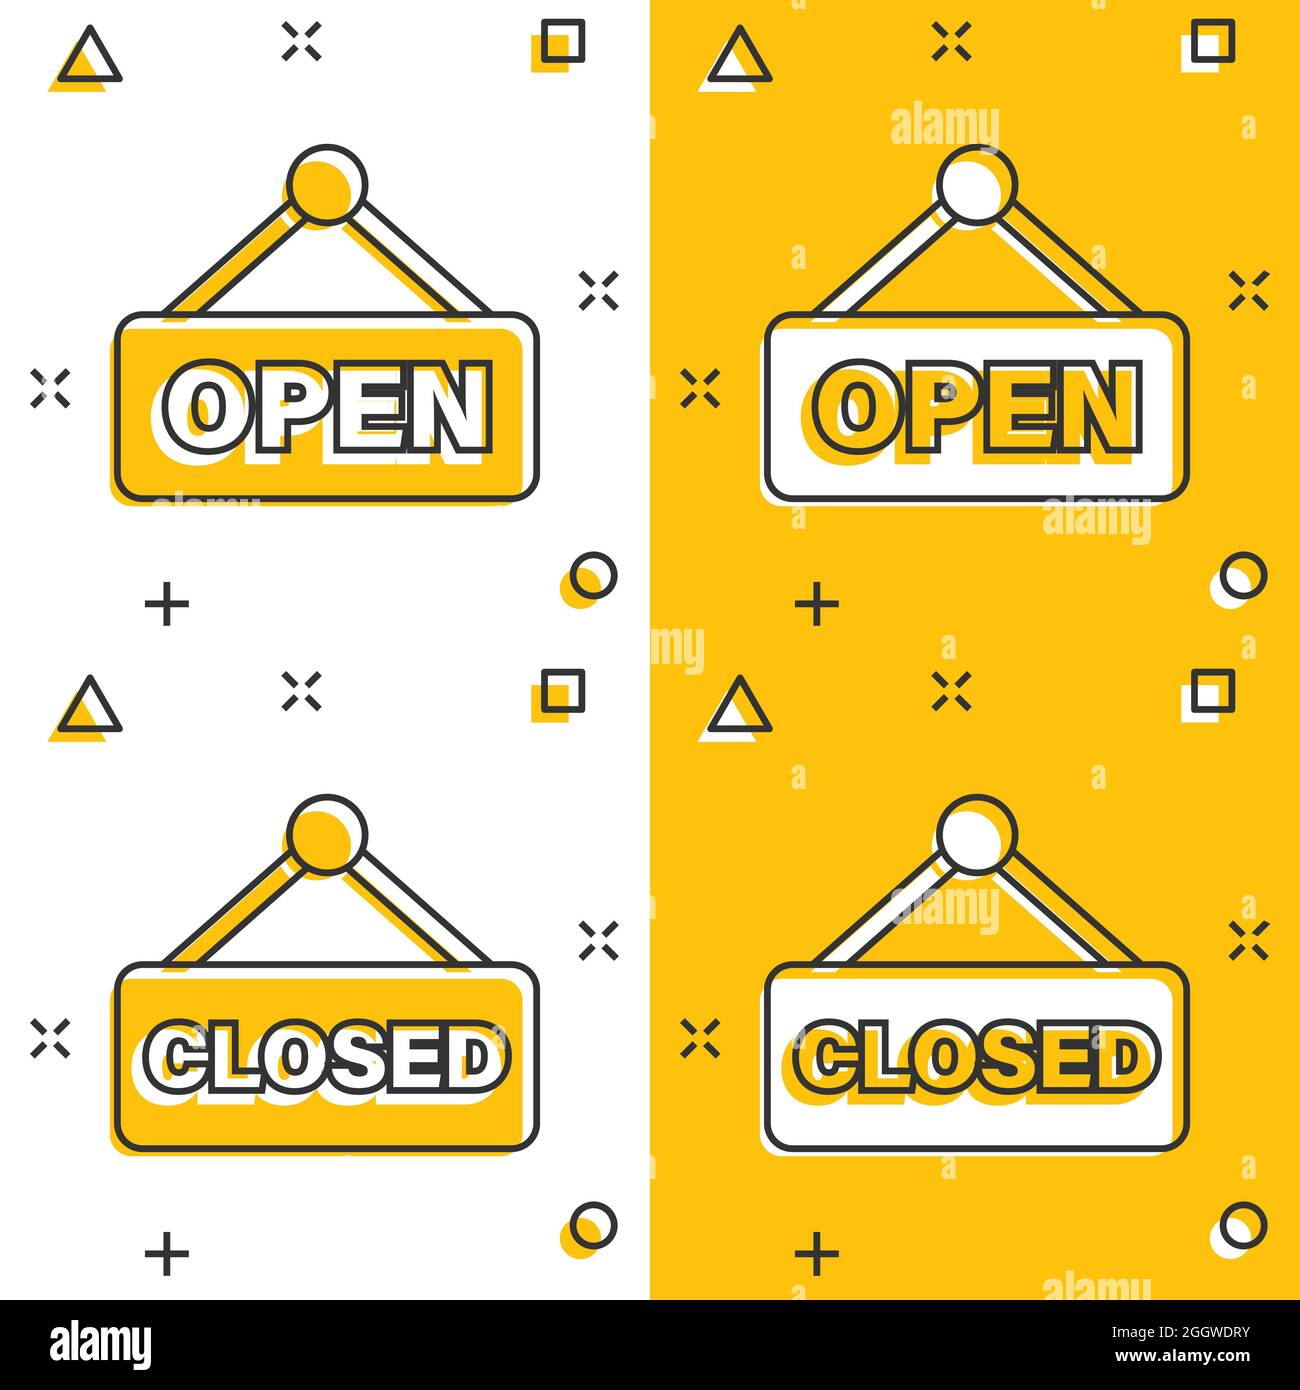 Open, closed sign icon in comic style. Accessibility cartoon vector illustration on white isolated background. Message splash effect business concept. Stock Vector